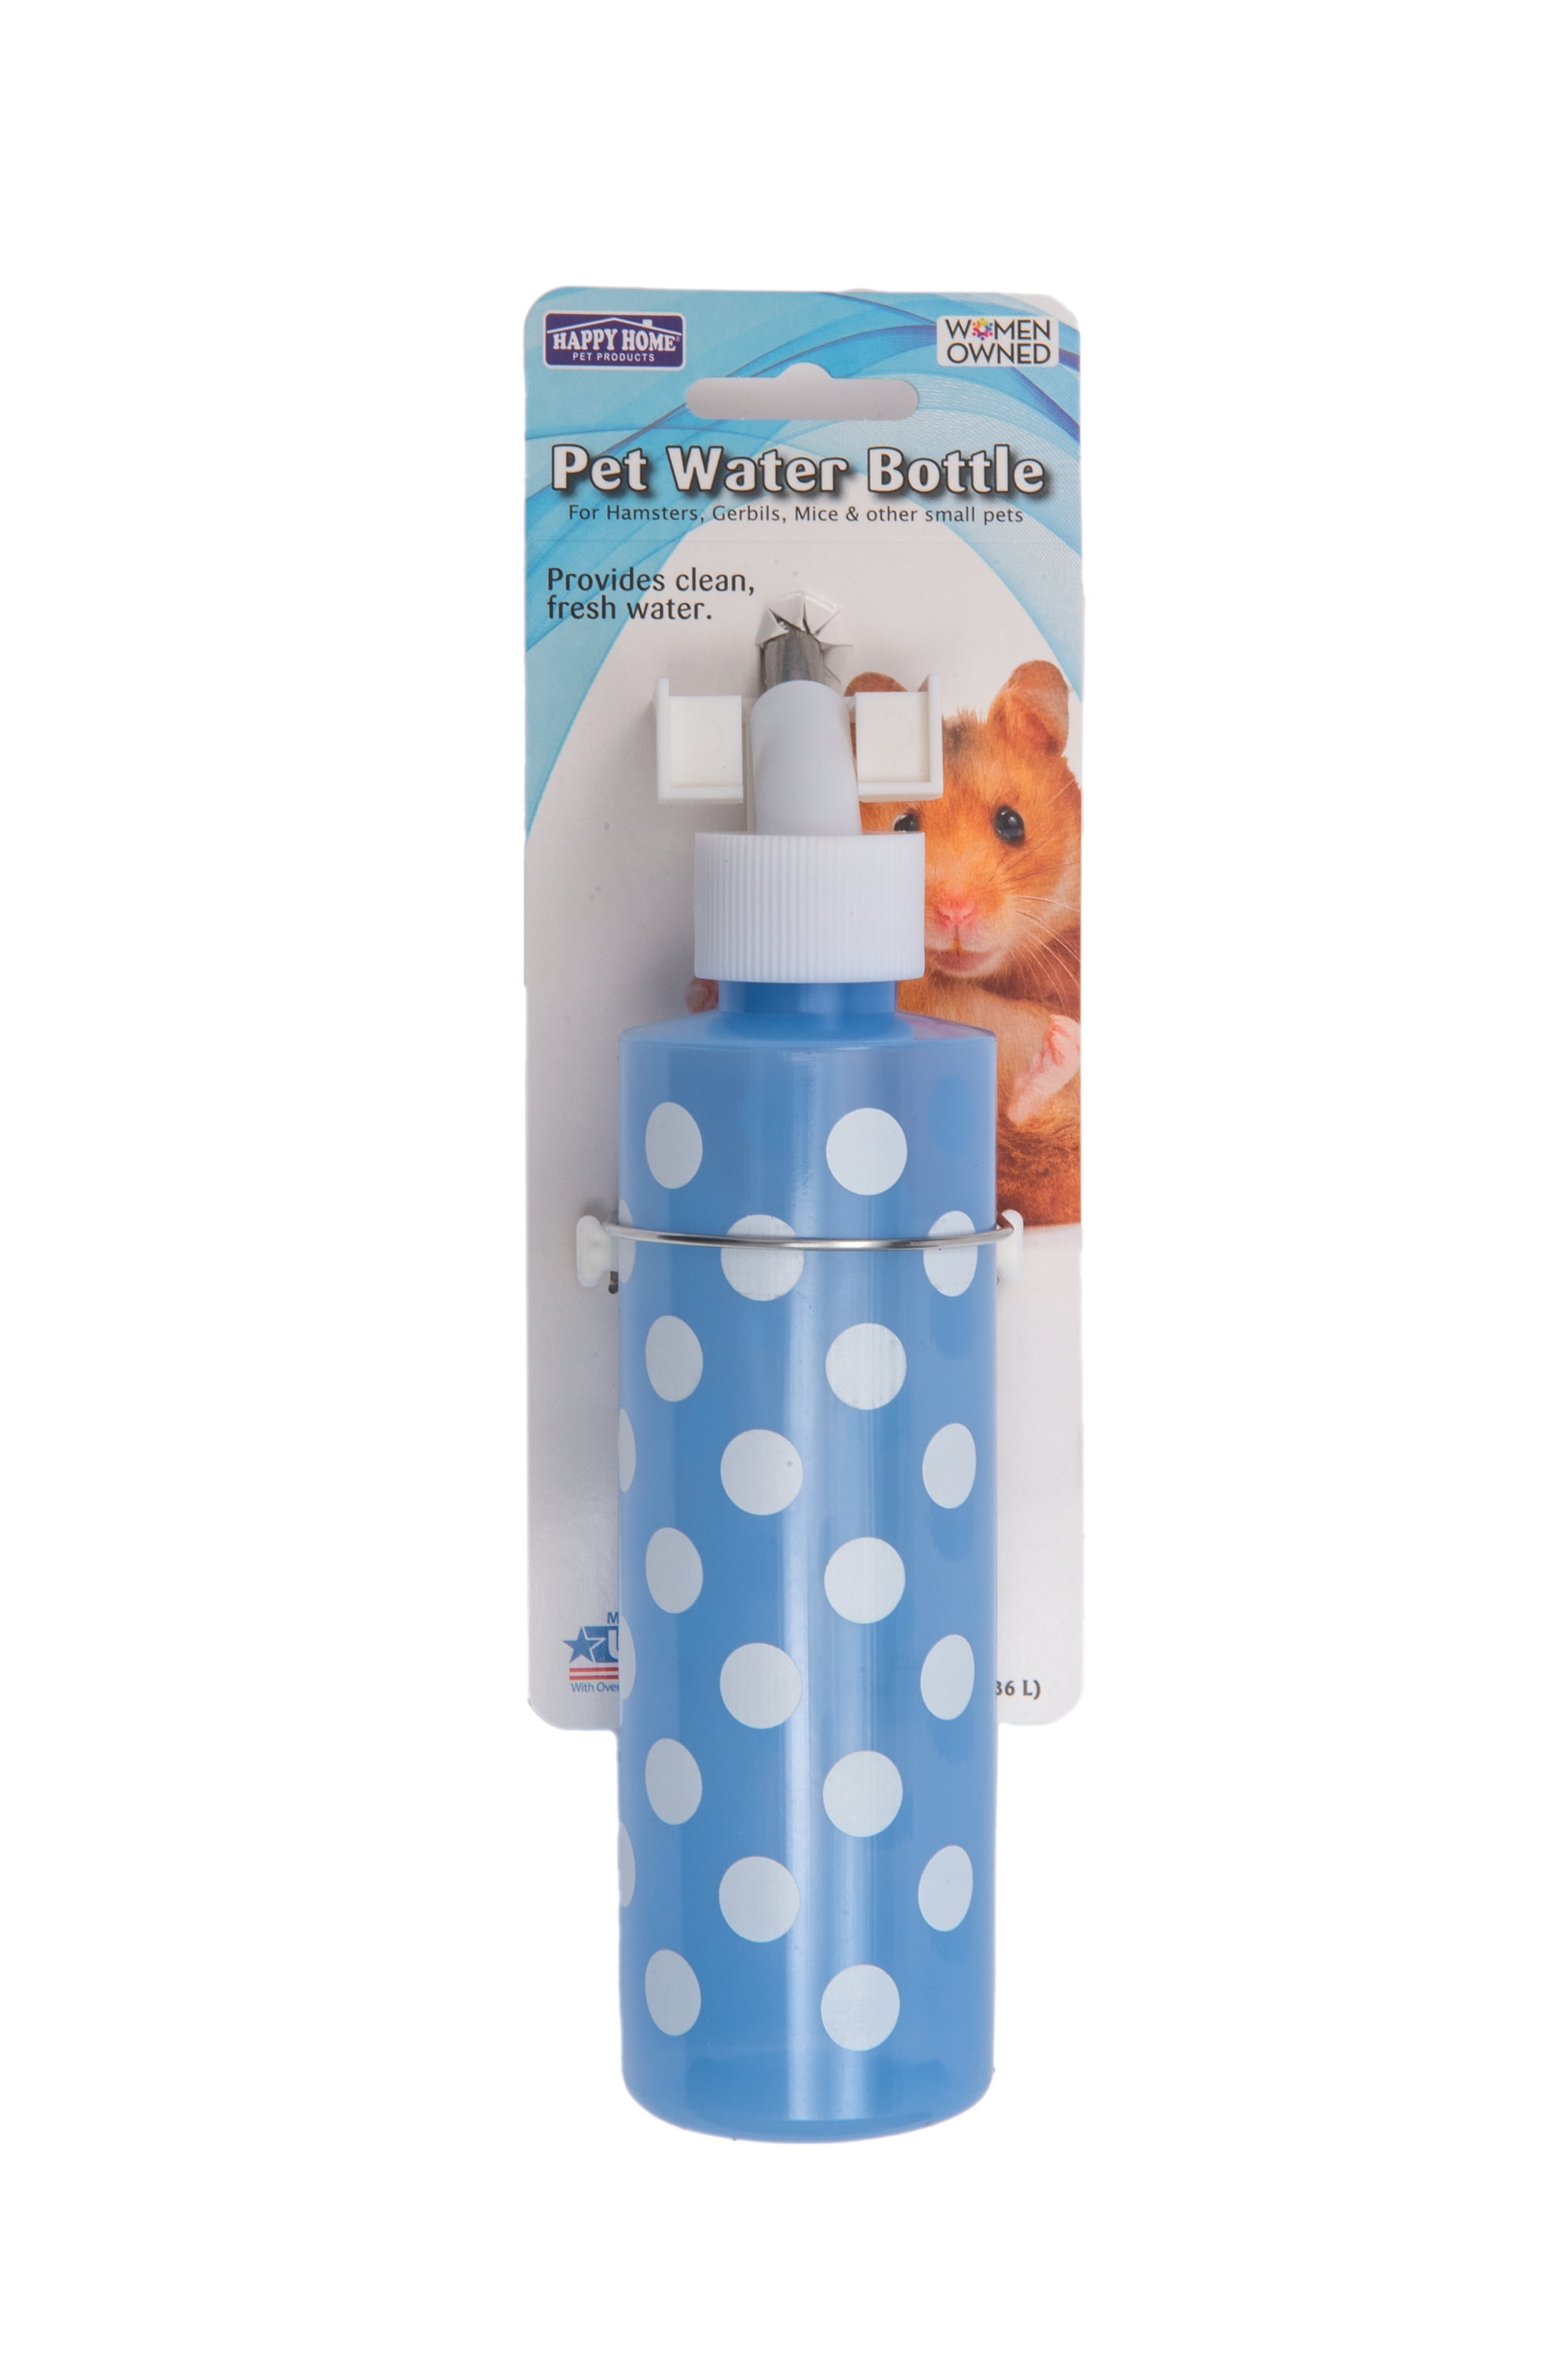 Fancylande Pet Automatic Water Dispenser,Non-drip Rolling Ball Type Water Feeder Bottle For Small Animal Rabbit Hamster Guinea Pig,Convenient And Clean Magnificent 1L/0.5L